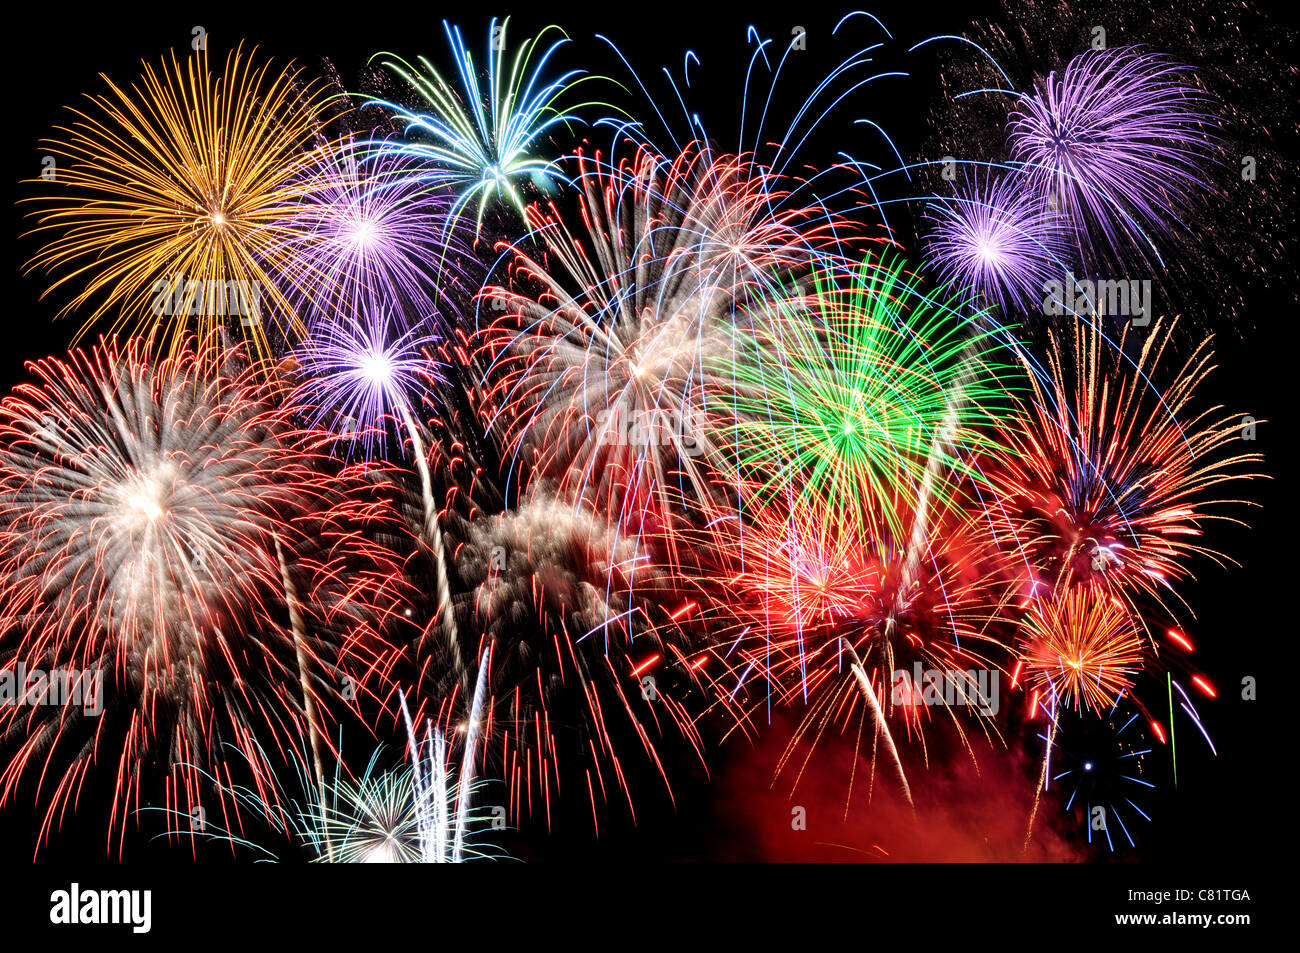 Fireworks of various colors busting against a black sky Stock Photo